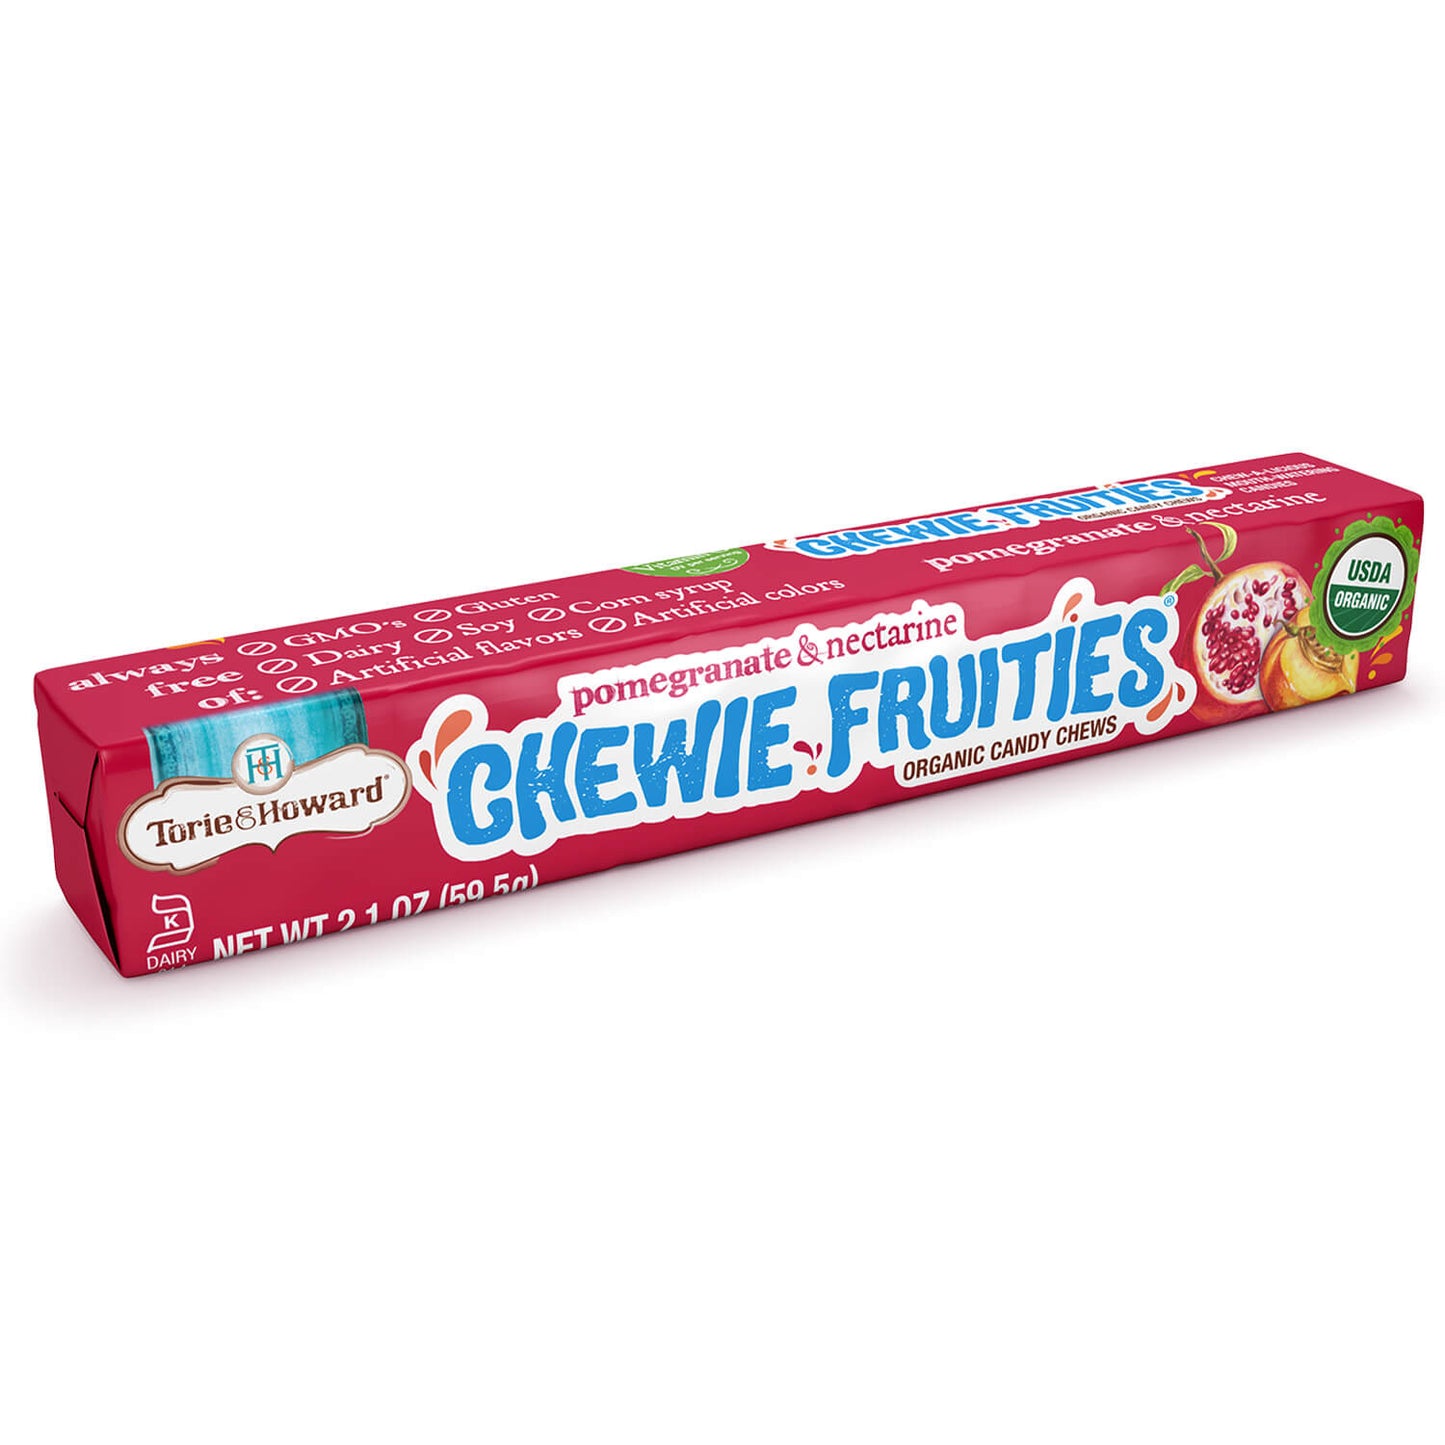 Torie & Howard Chewie Fruities Pomegranate & Nectarine Candy, Front of 2.1oz Stick Pack